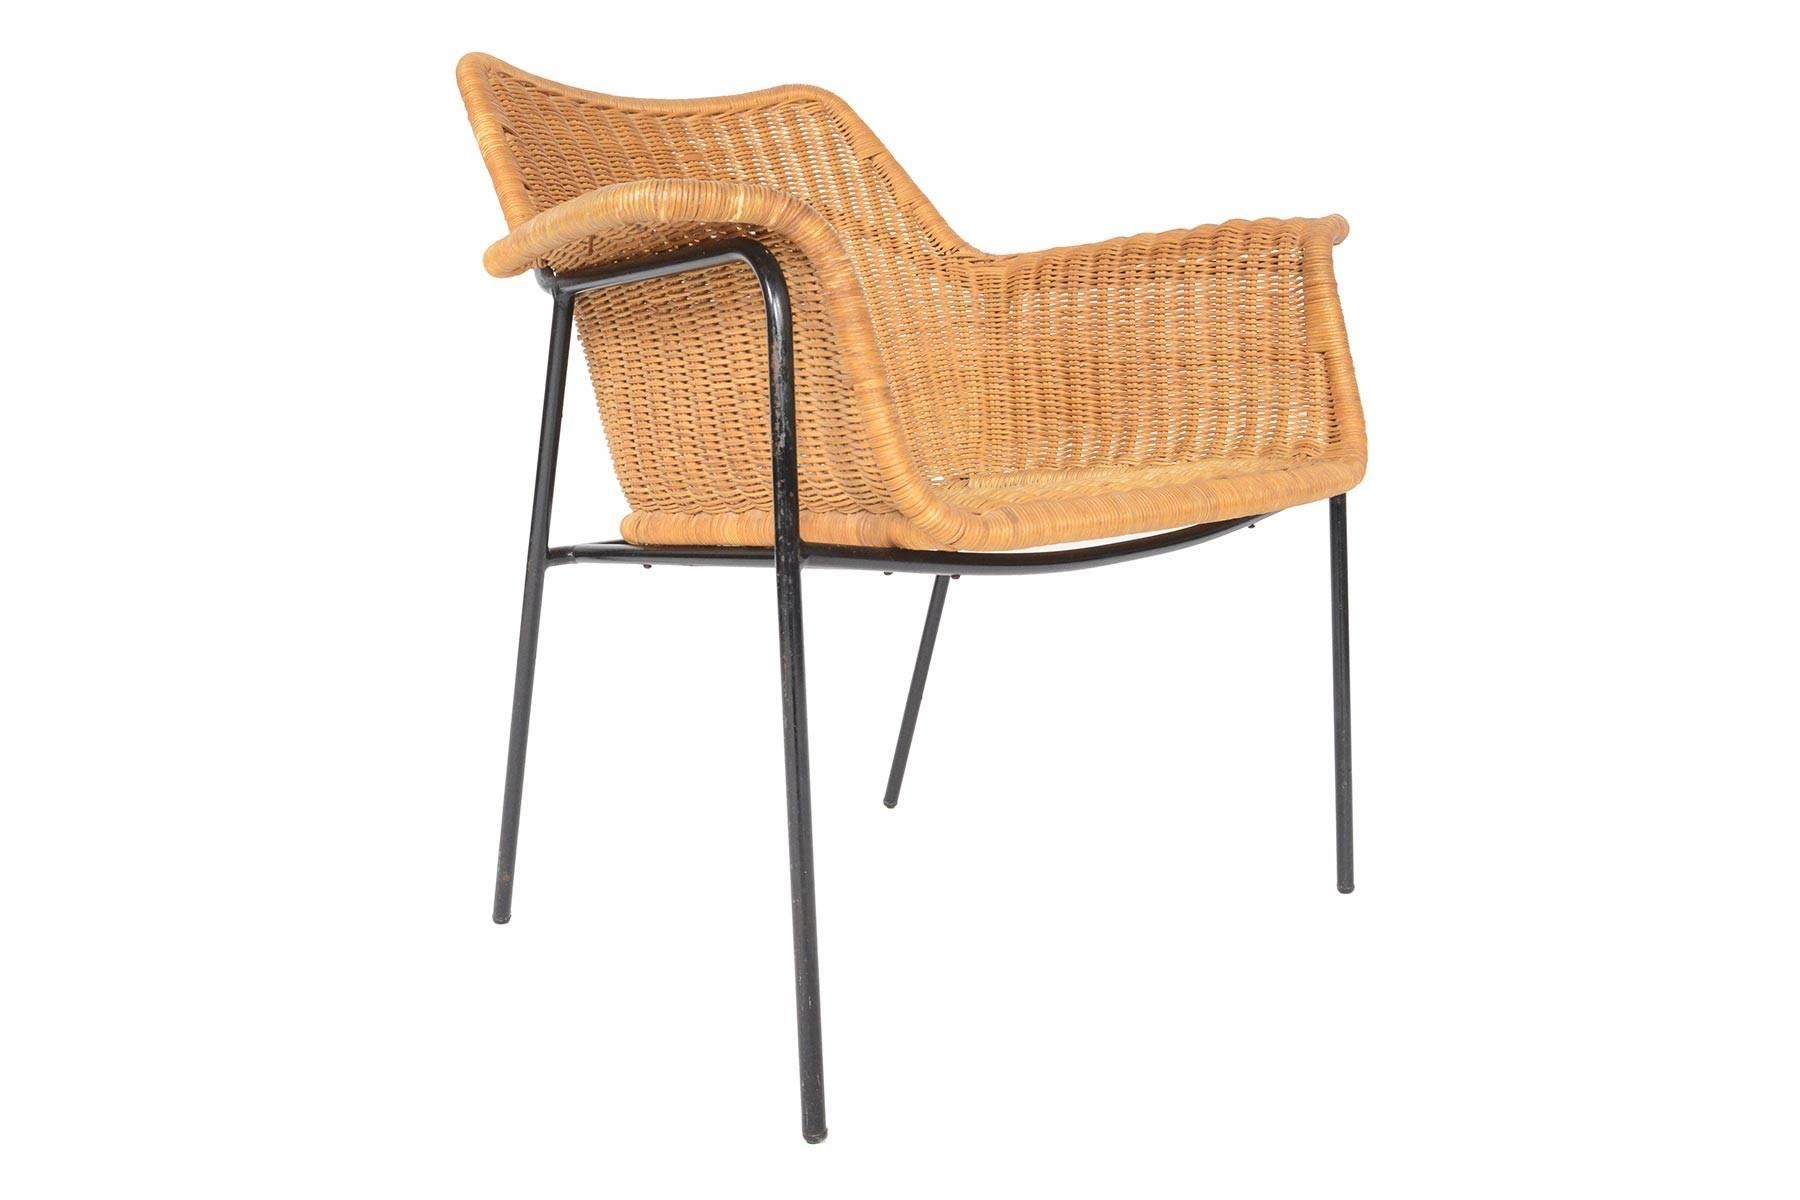 This unusual Danish modern lounge chair is crafted in wicker and iron and offers wonderful midcentury stylings. The wicker bucket features winged arms which delicately lay over the ebonized iron frame. In excellent original condition with typical